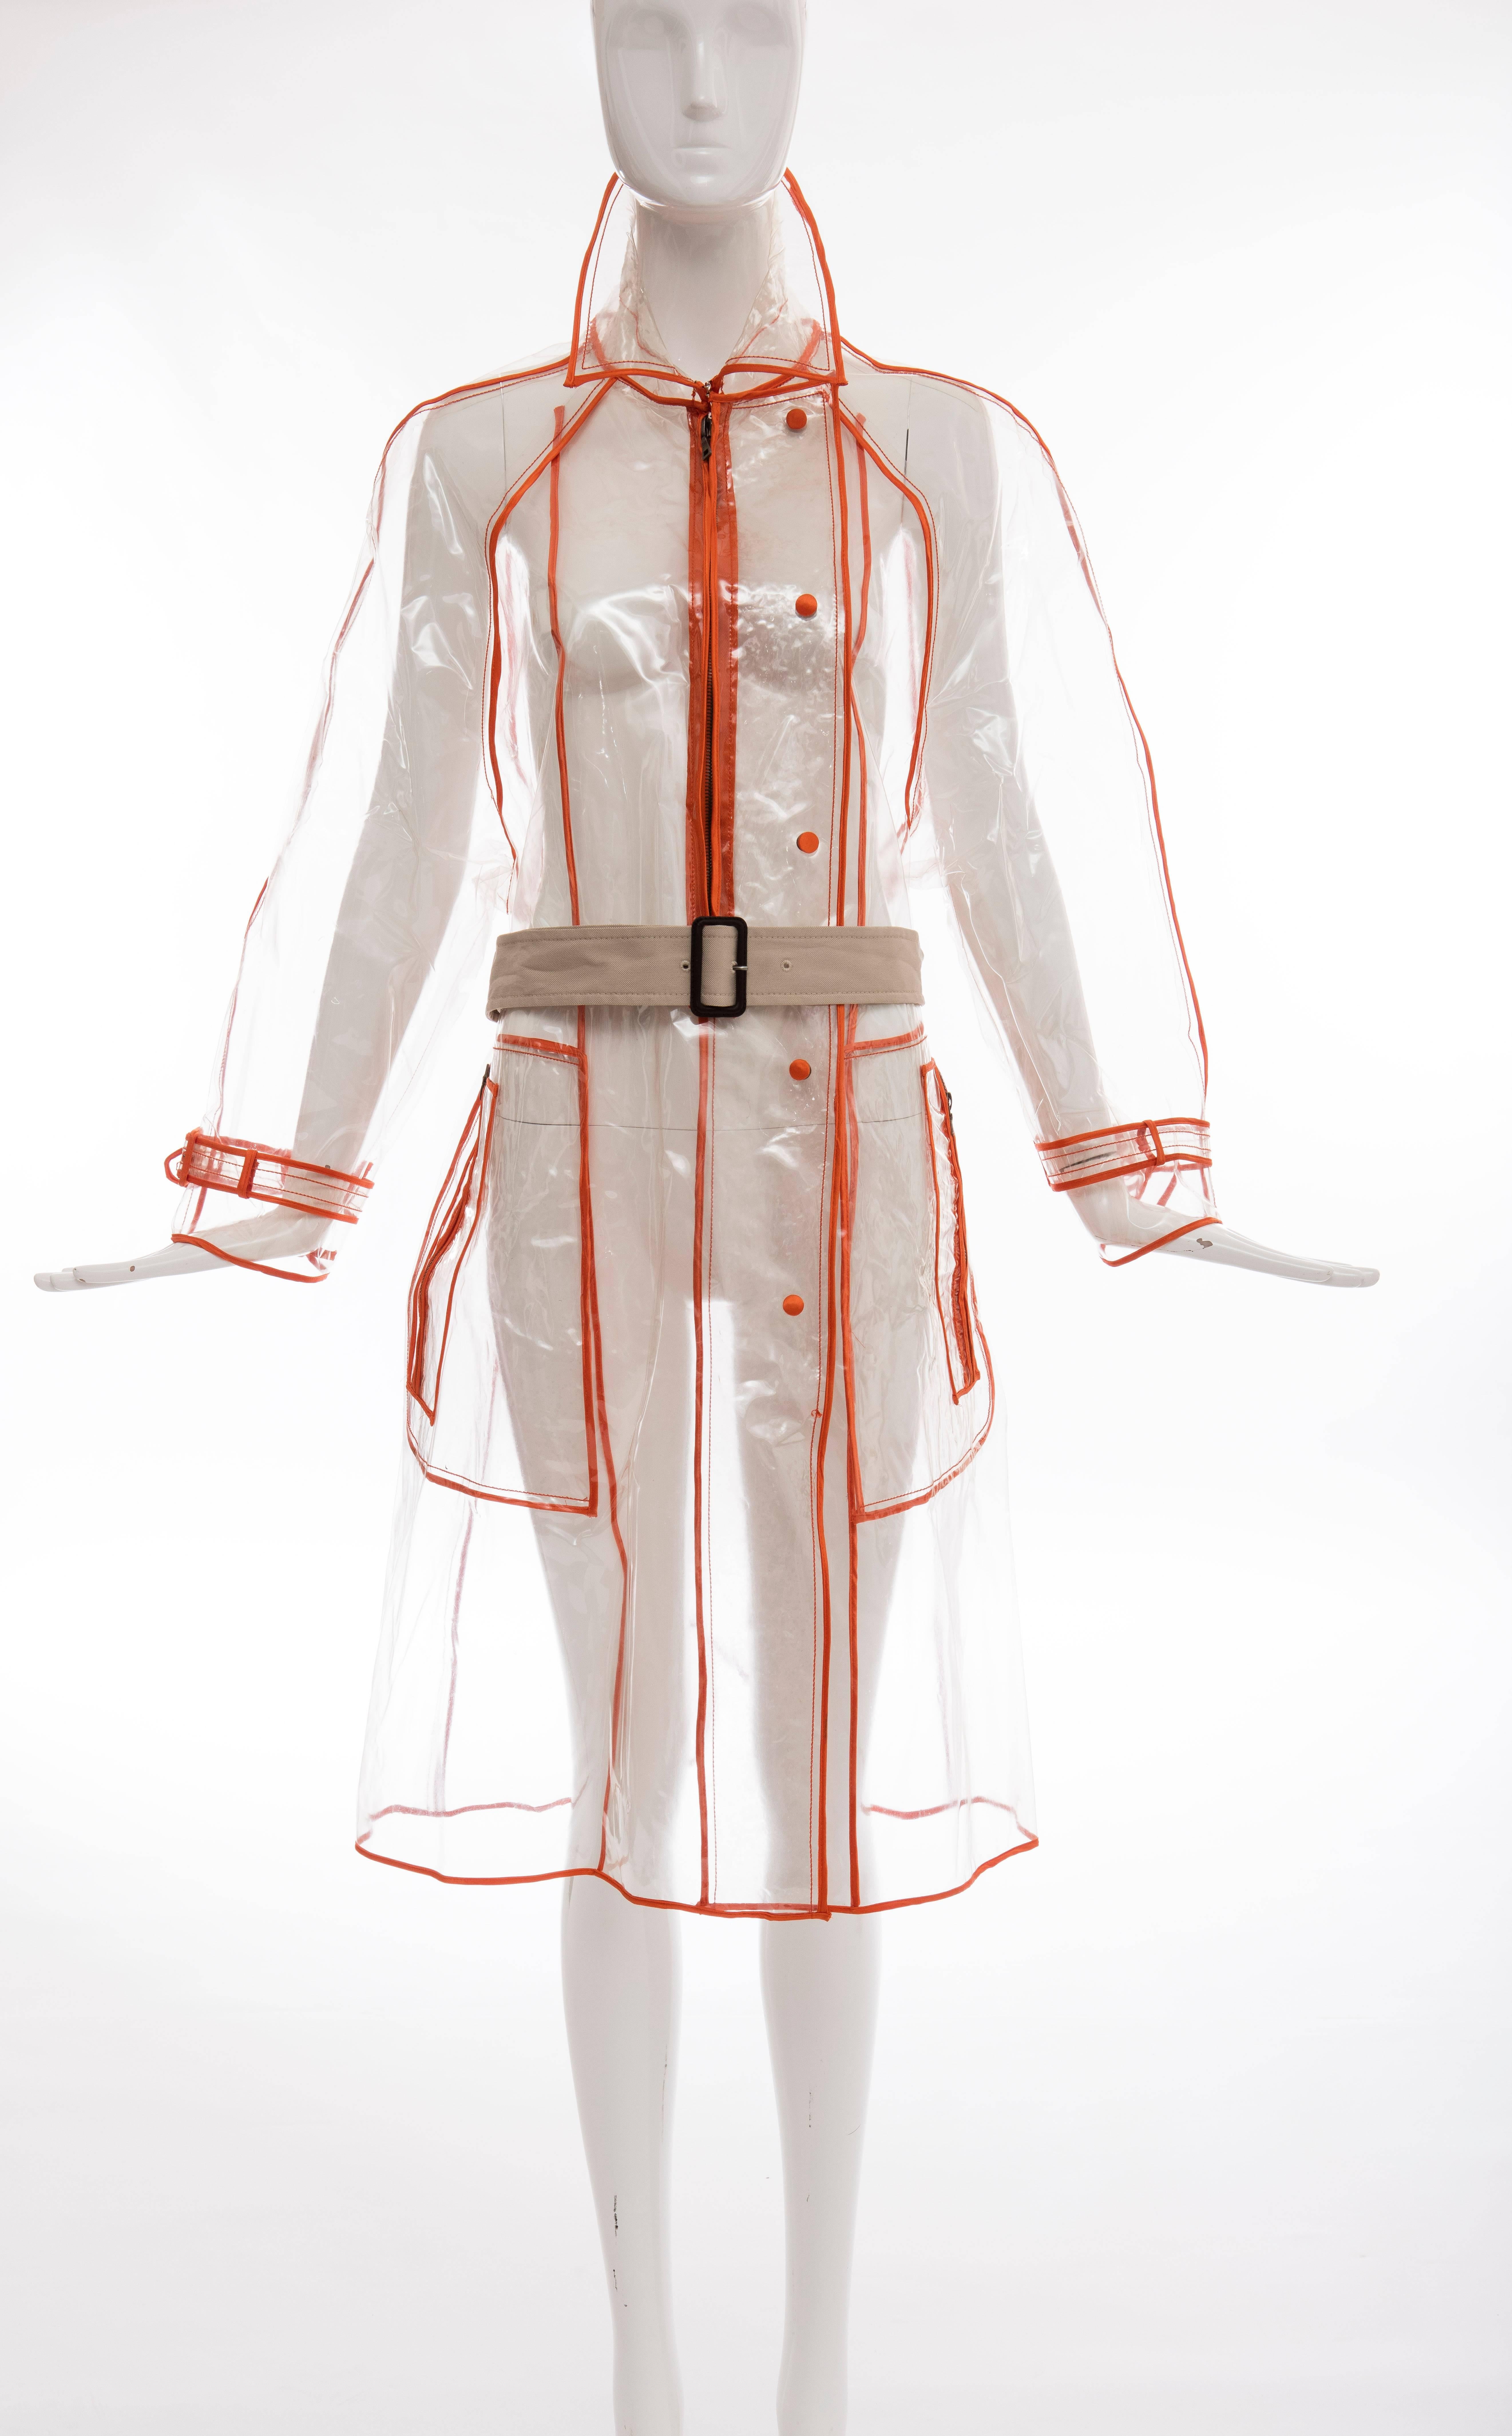 Prada, Autumn - Winter 2002-3, transparent PVC rain coat with pointed collar, long sleeves, dual zip pockets at sides, belted waist, contrasting orange trim throughout and snap and zip closures at front.  

IT. 42
US. 6

Bust: 46
Waist: 46
Shoulder: